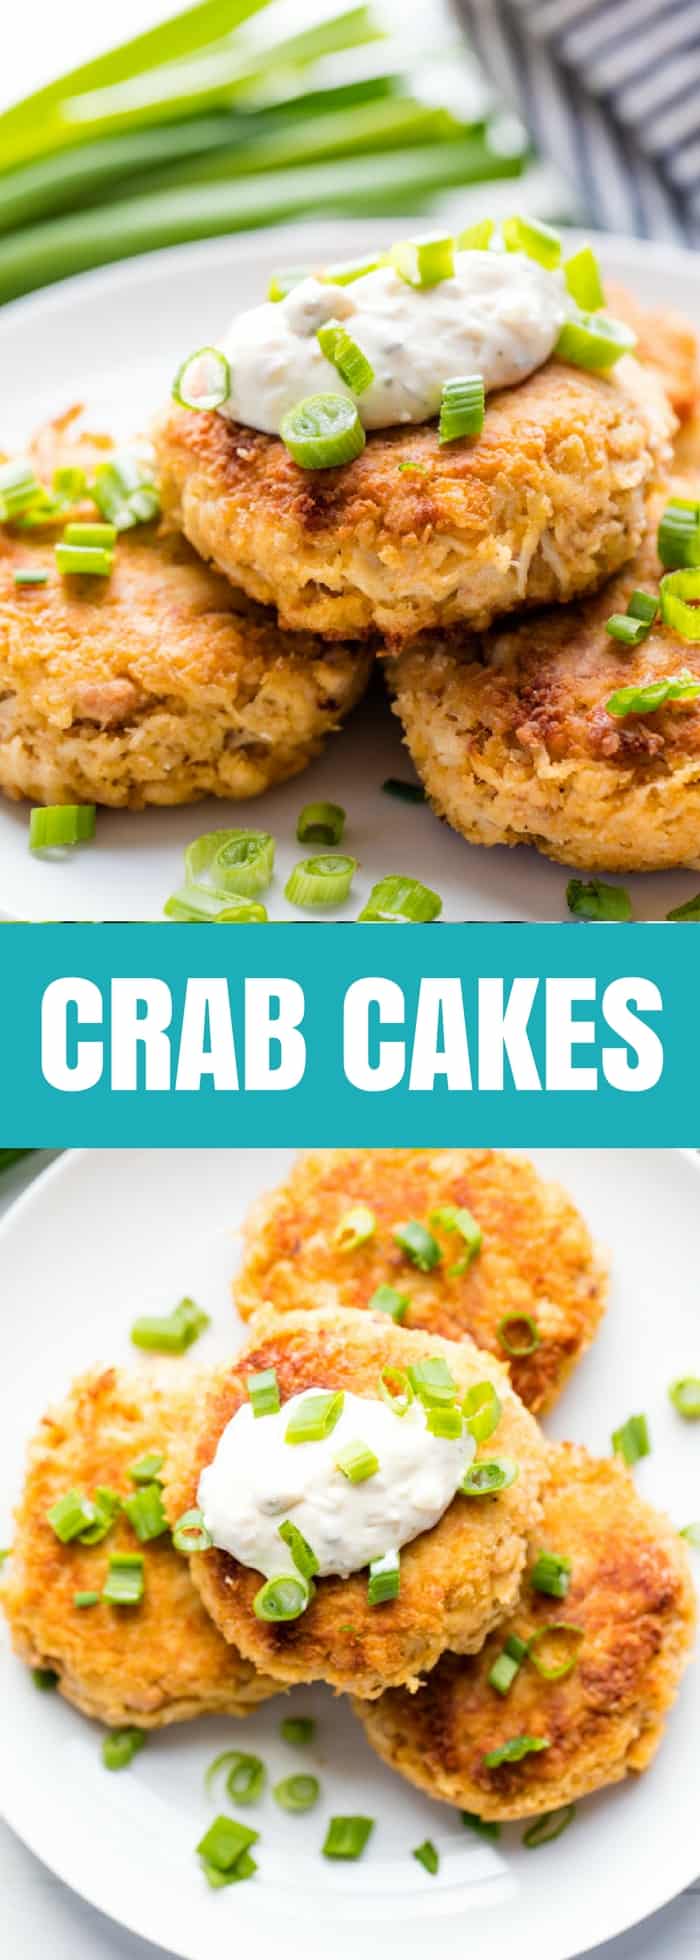 Perfect Crab Cakes are super easy to make. Use real lump or imitation crab and put together a gourmet crab cake in under 15 minutes. No restaurant required!